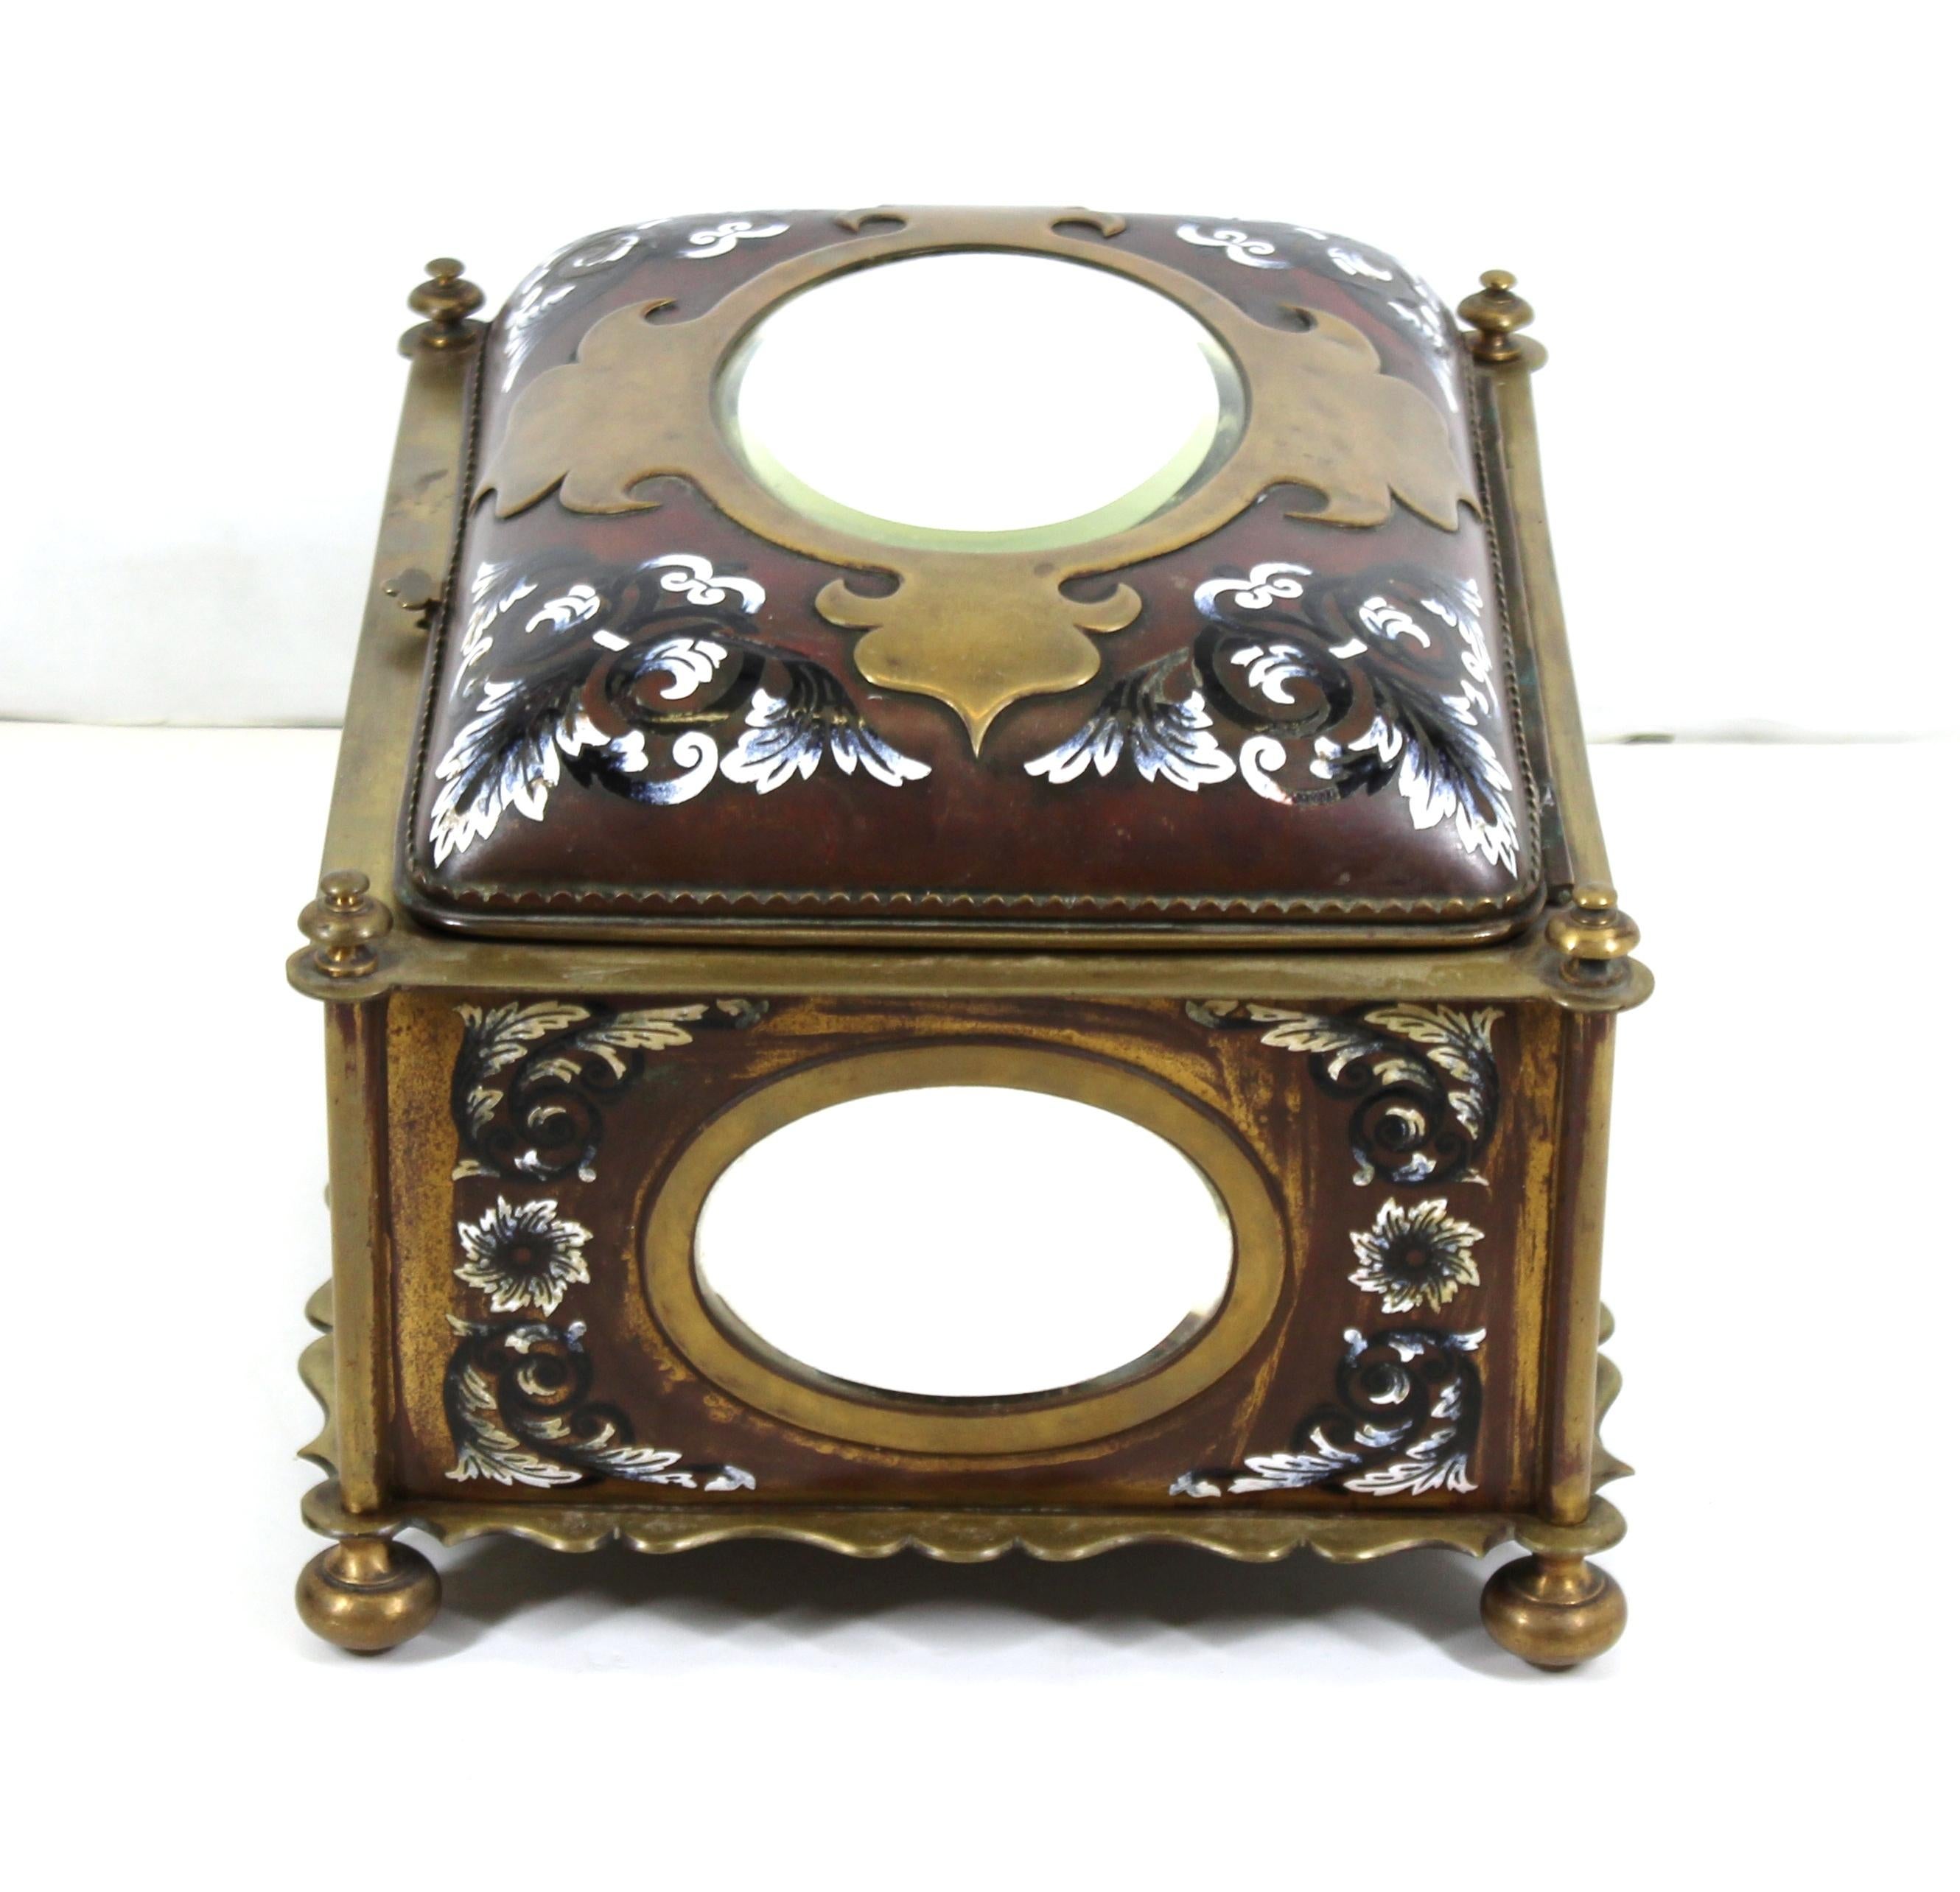 19th Century French Renaissance Revival Champleve Enamel Jewelry Box with Oval Mirror Inserts For Sale